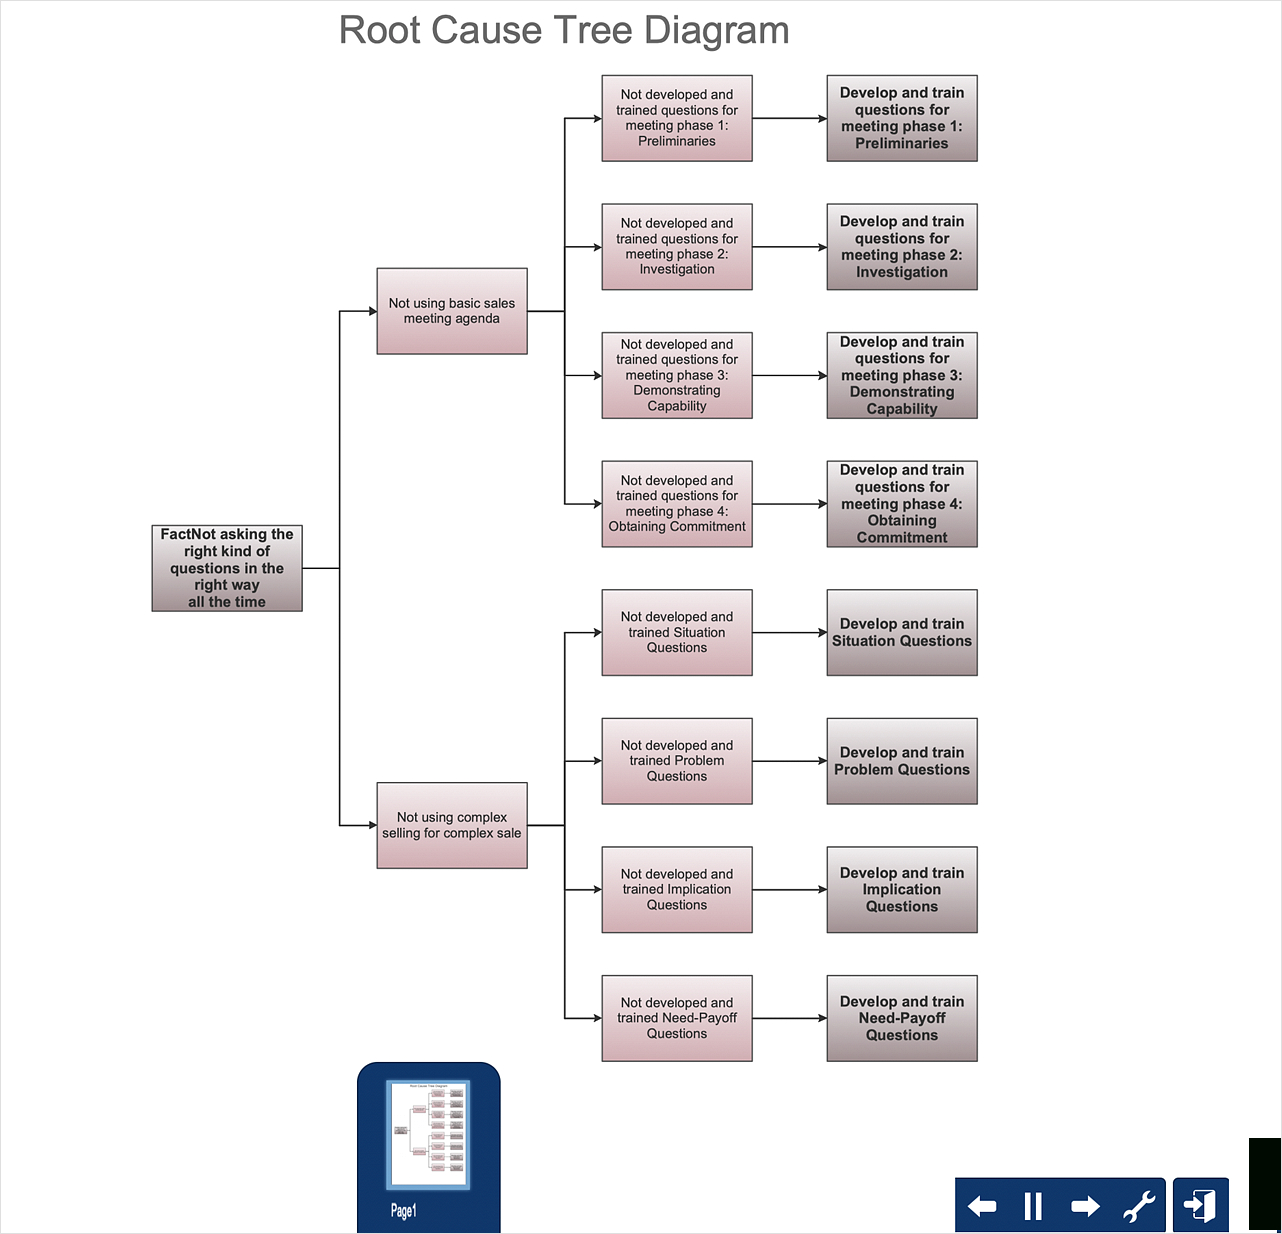 Root Cause Analysis Tree Diagram – Template | How To Create Regarding Blank Tree Diagram Template